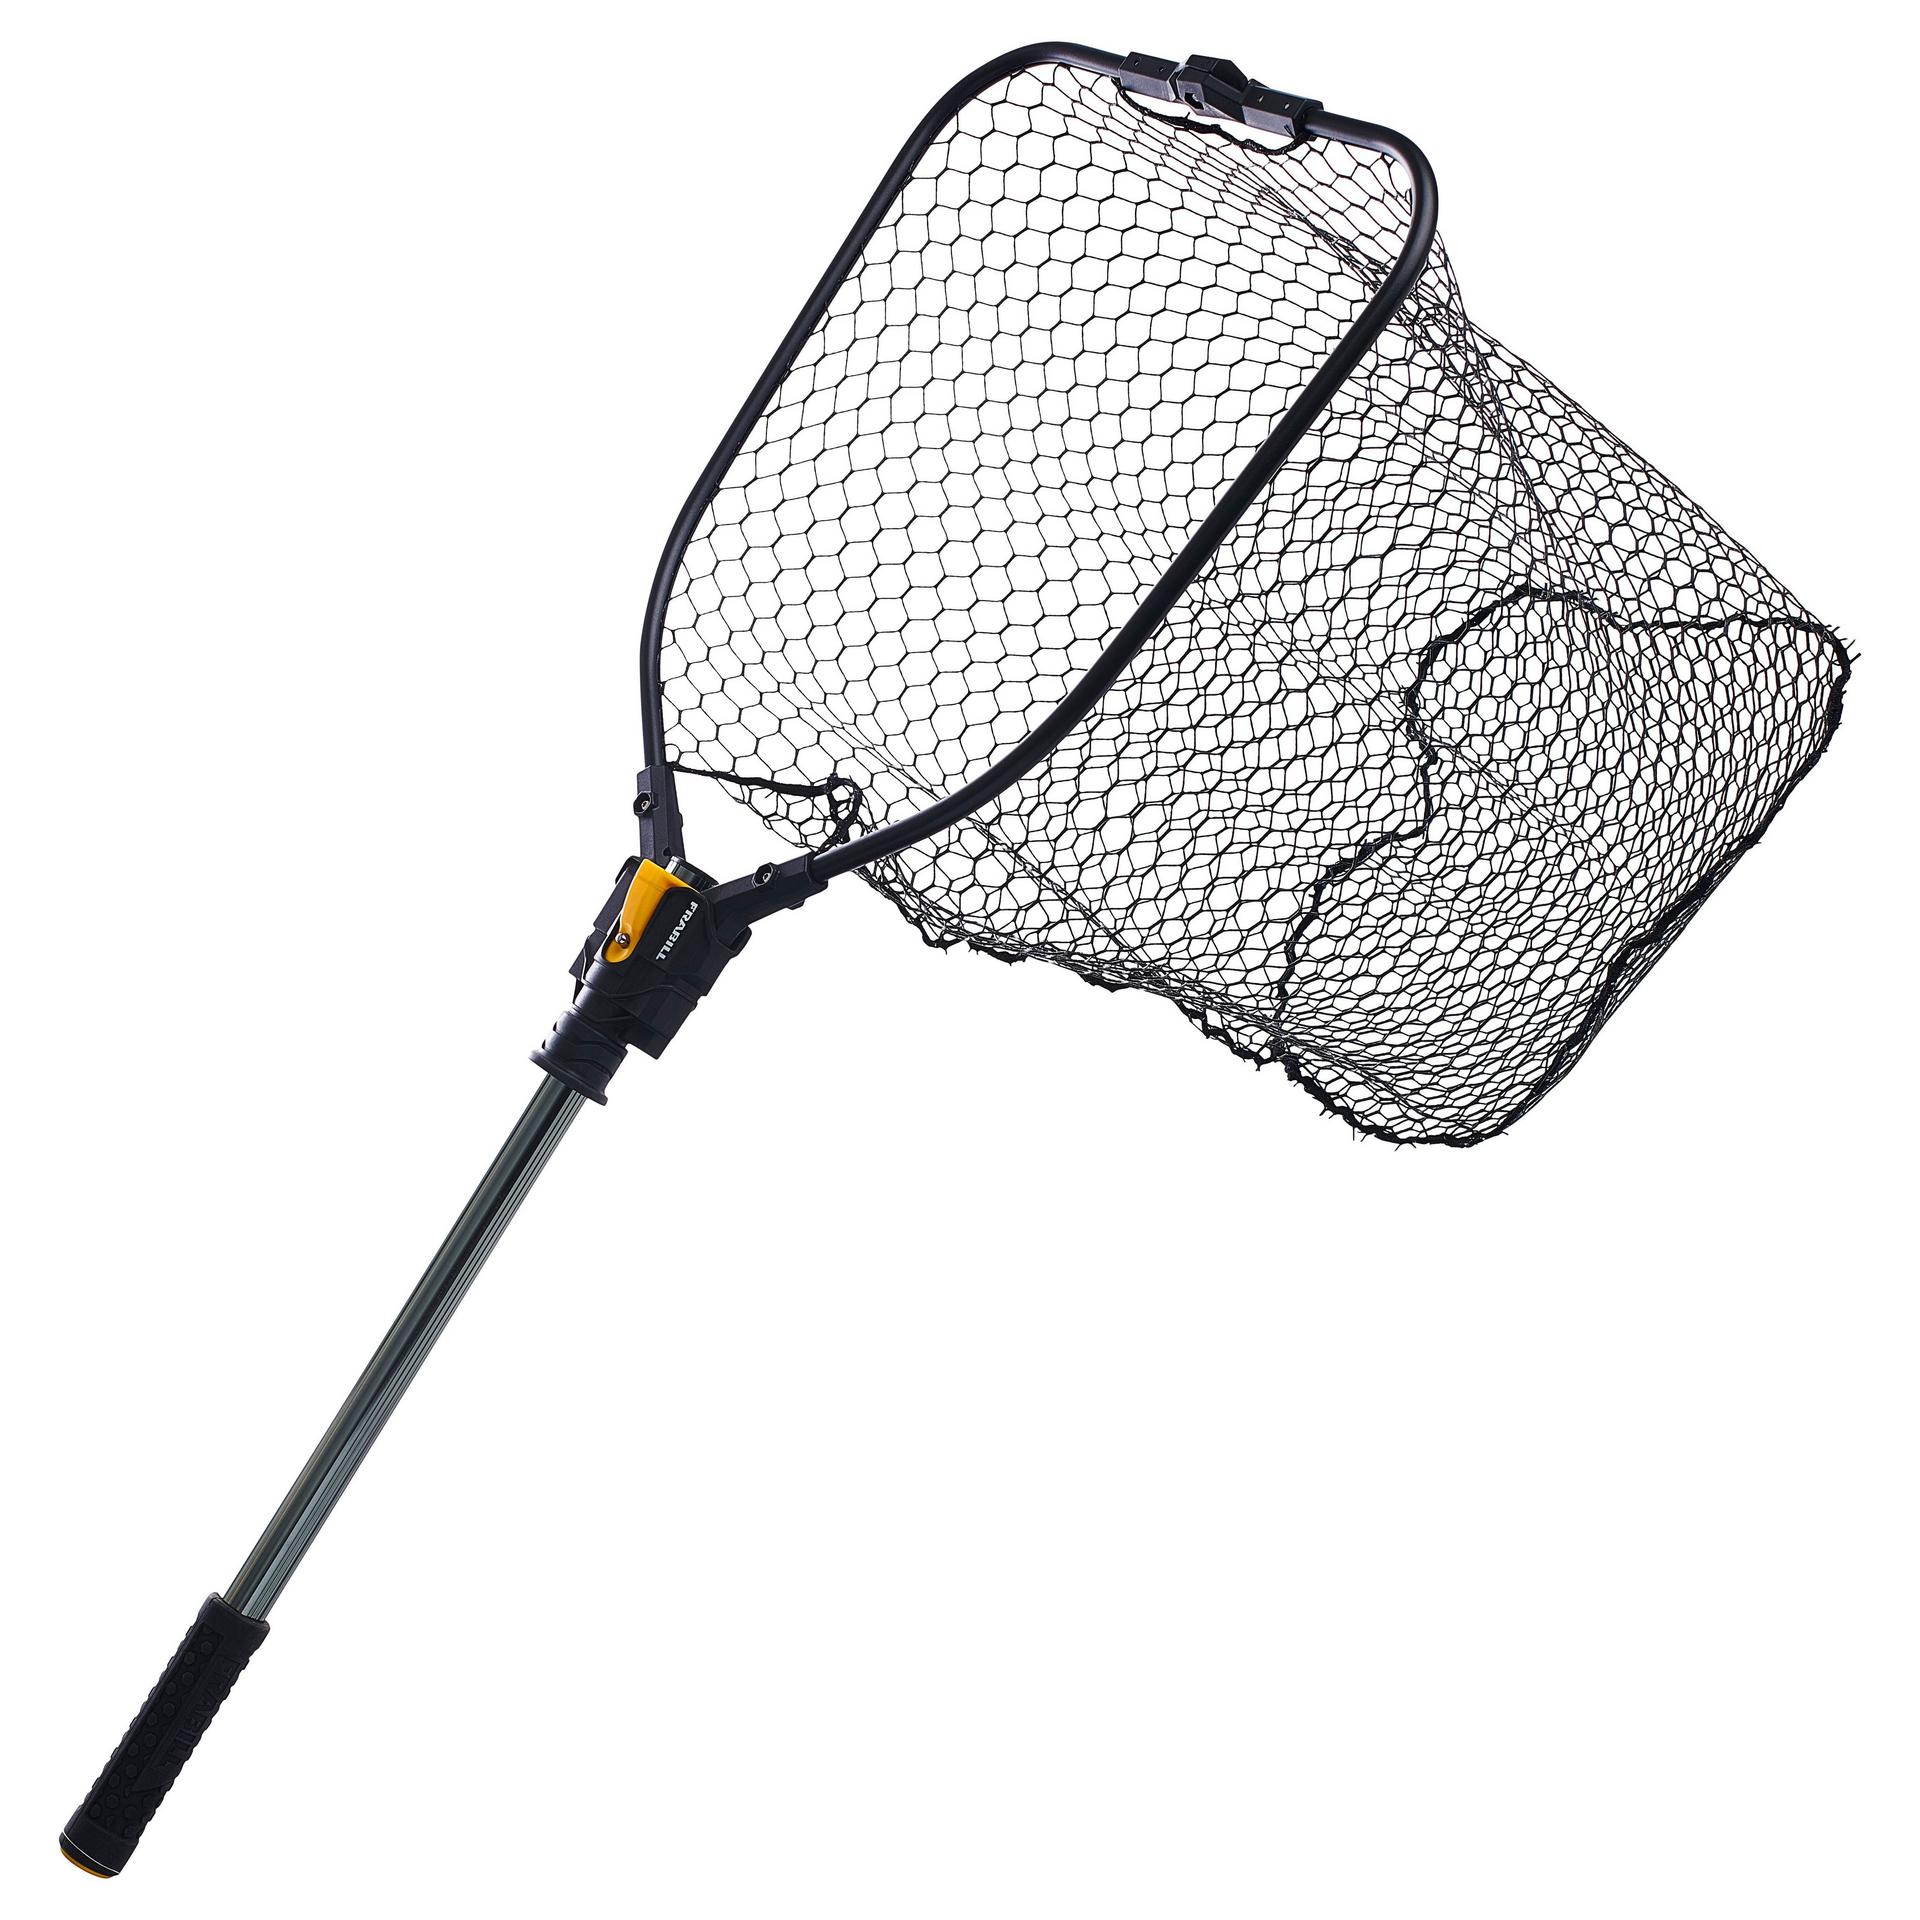 Frabill 32 in. Tangle Free Steel Power Catch Fishing Net with Adjustable Handle